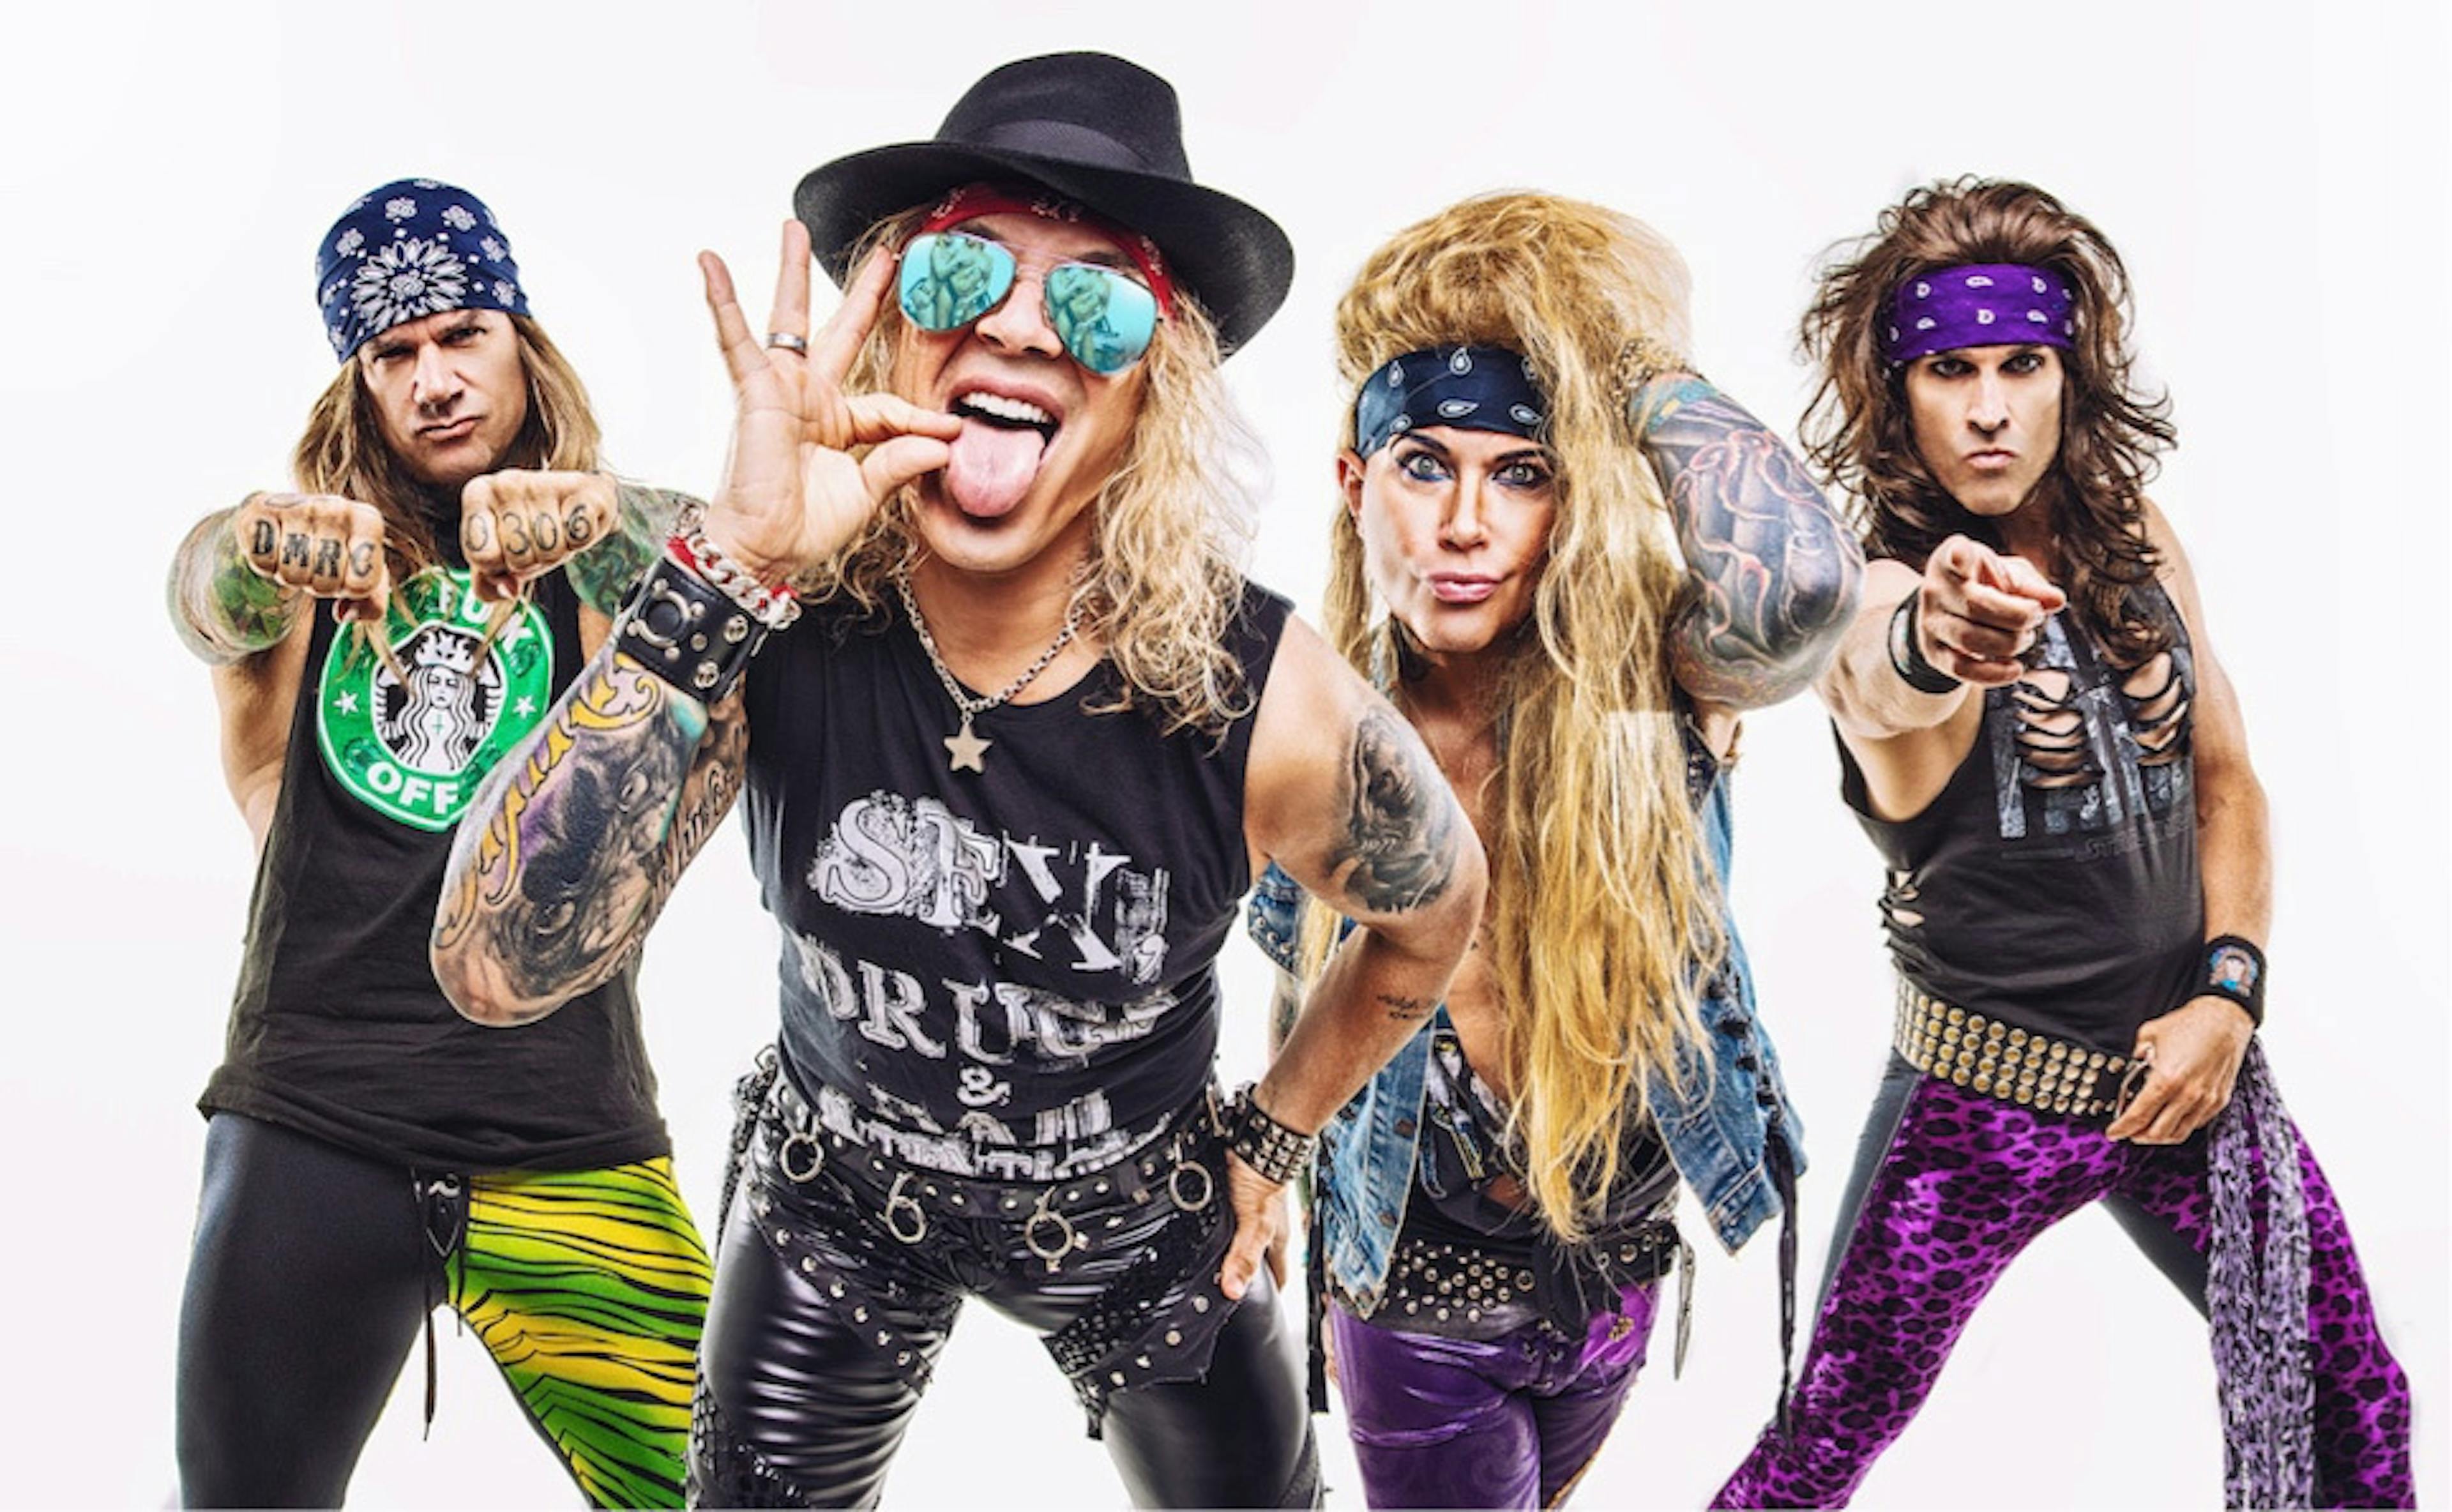 Steel Panther announce departure of Lexxi Foxx; band will "continue to rock the world"